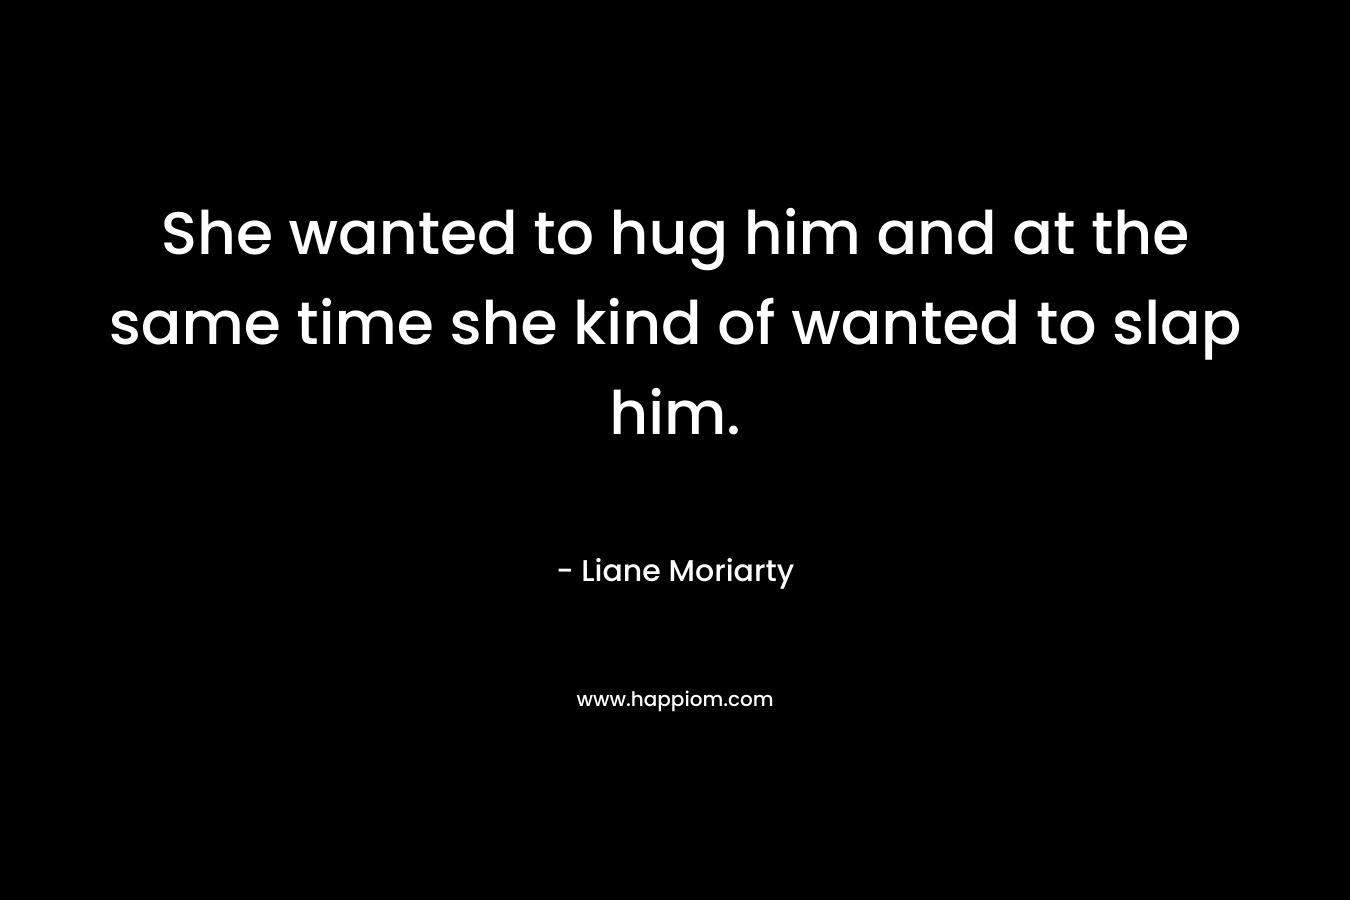 She wanted to hug him and at the same time she kind of wanted to slap him. – Liane Moriarty